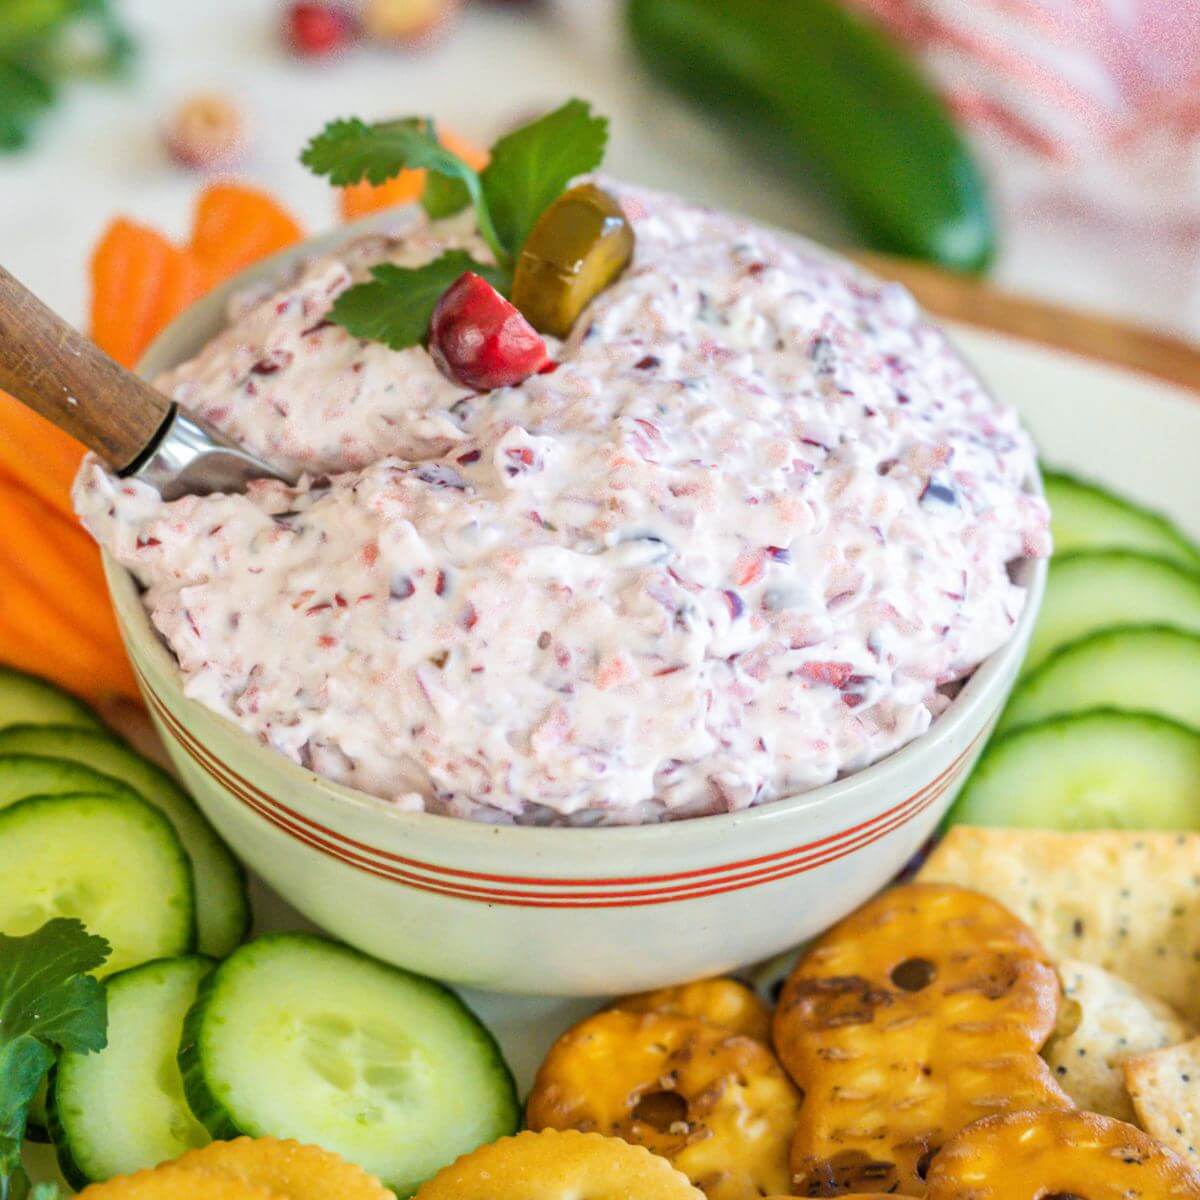 A bowl of dip is shown up close with better views of the cranberry and jalapeno garnish.